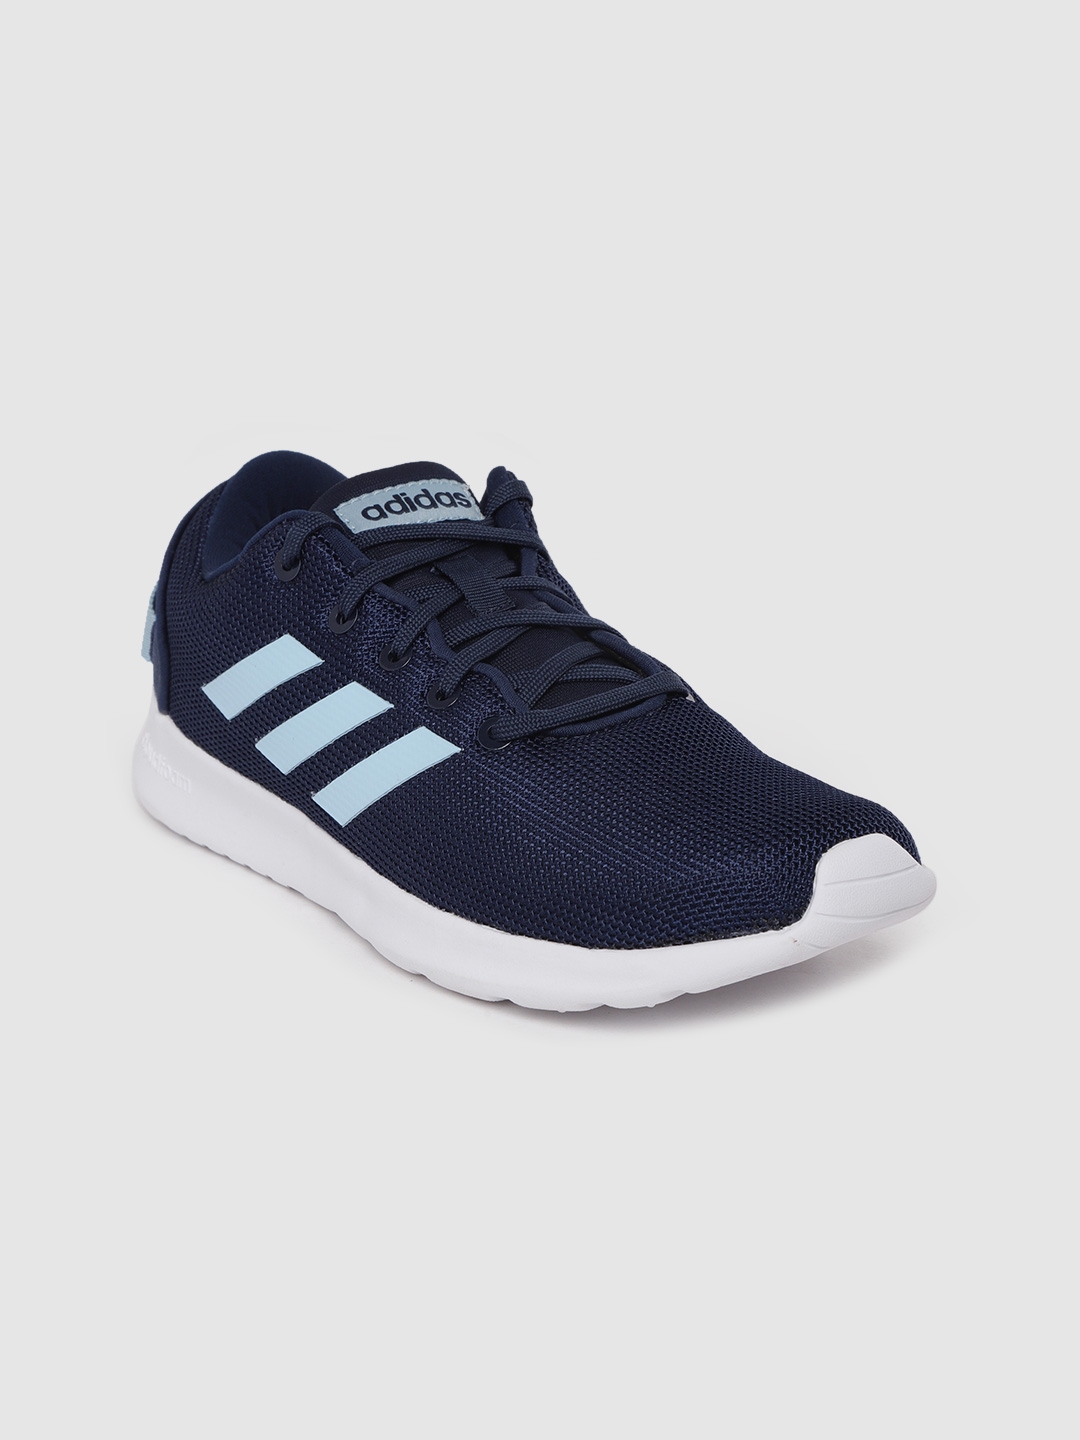 Buy ADIDAS Women Navy Blue Solid Arcadies Running Shoes - Sports Shoes ...